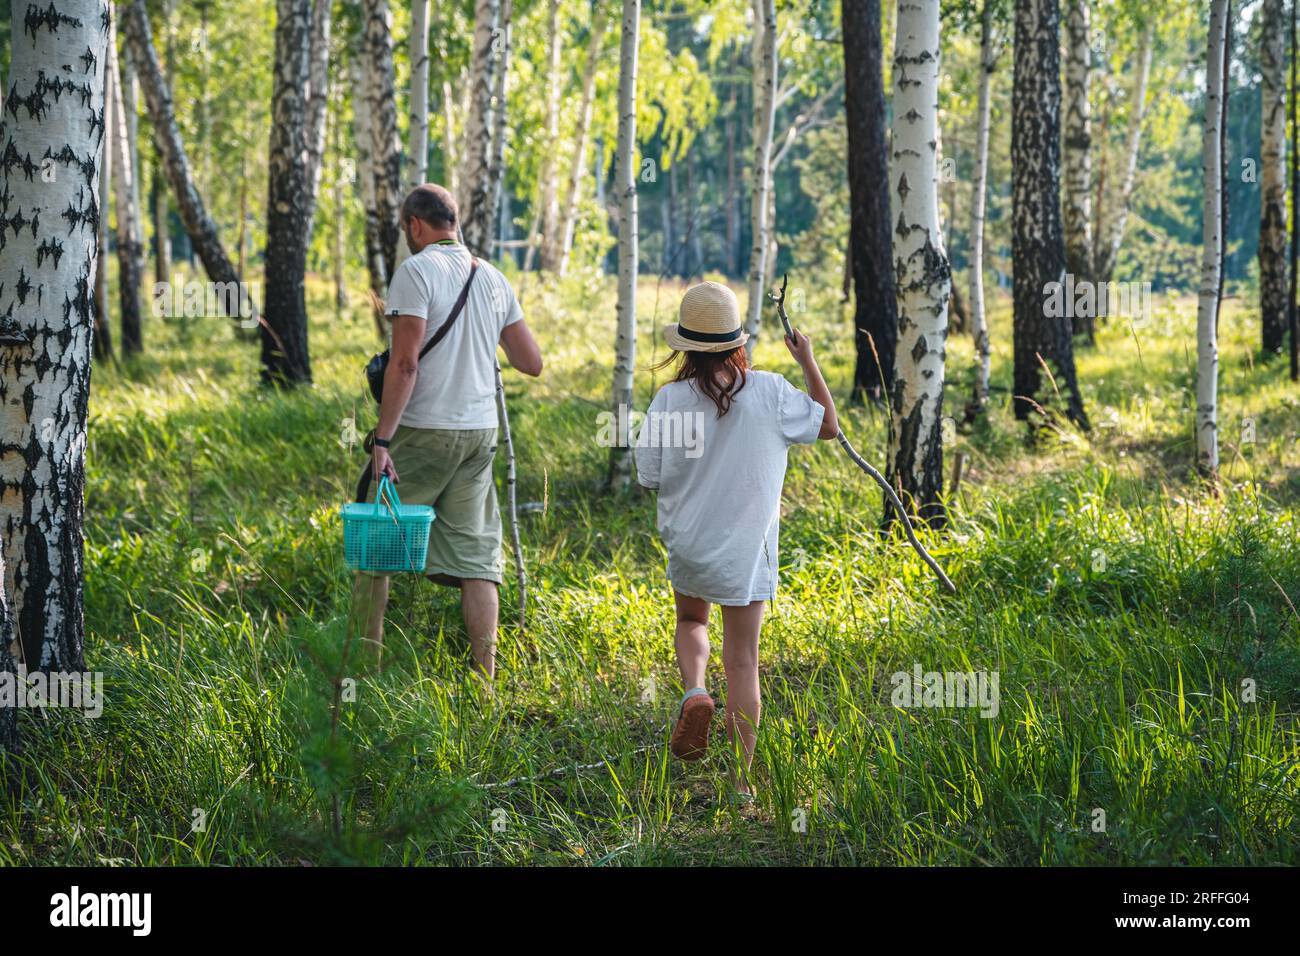 Mushroom pickers Dad with his daughter with sticks in the forest looking for mushrooms Stock Photo